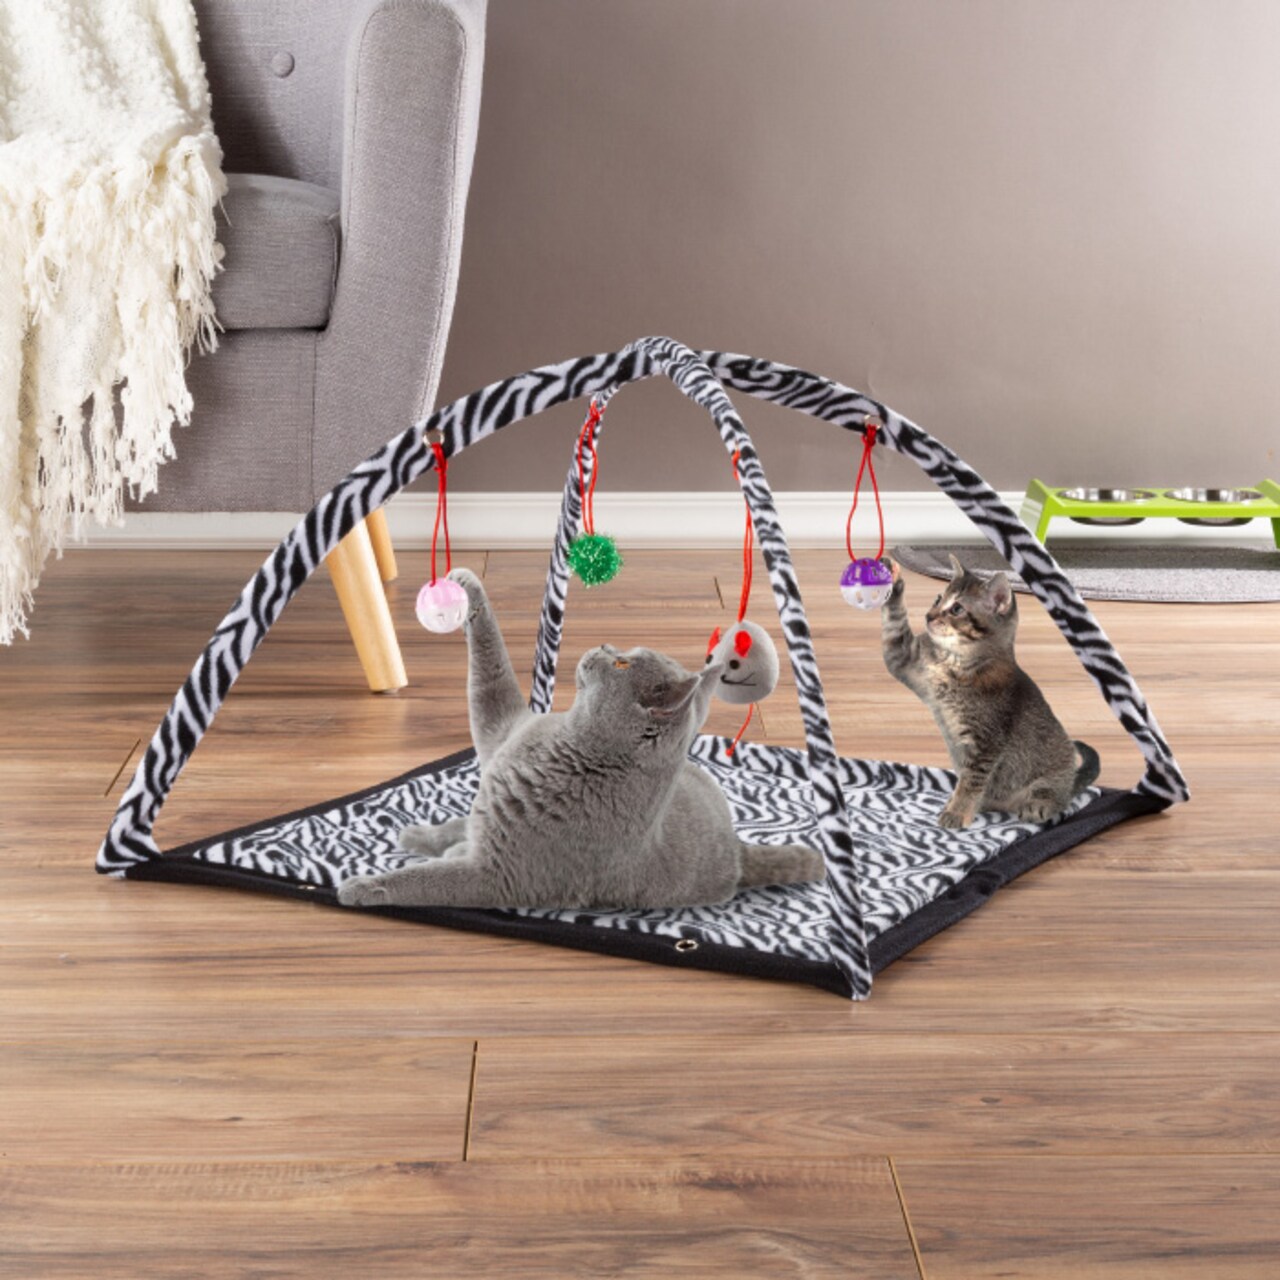 Petmaker Cat Activity Center- Interactive Play Area Station for Cats,  Kittens With Fleece Mat, Hanging Toys, Foldable Design for